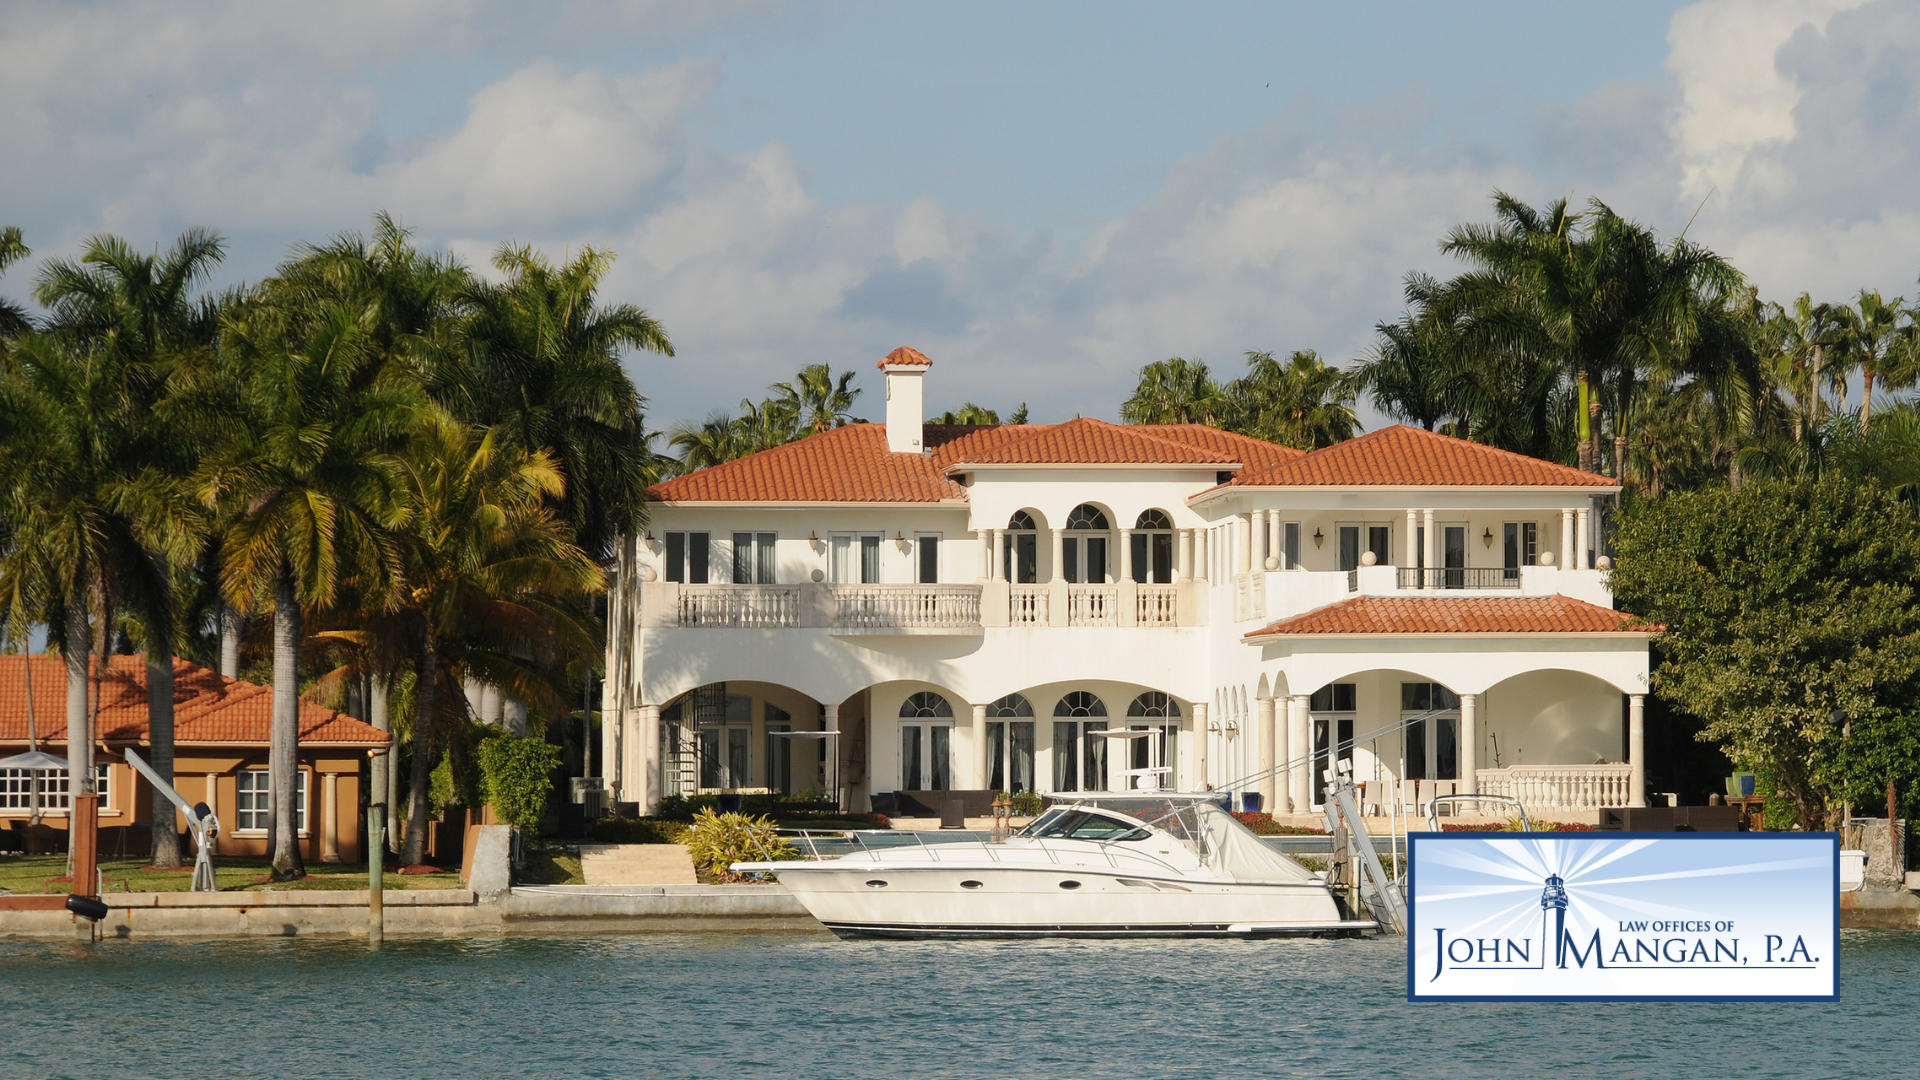 A Florida declaration of domicile will enable you to qualify for important tax benefits.